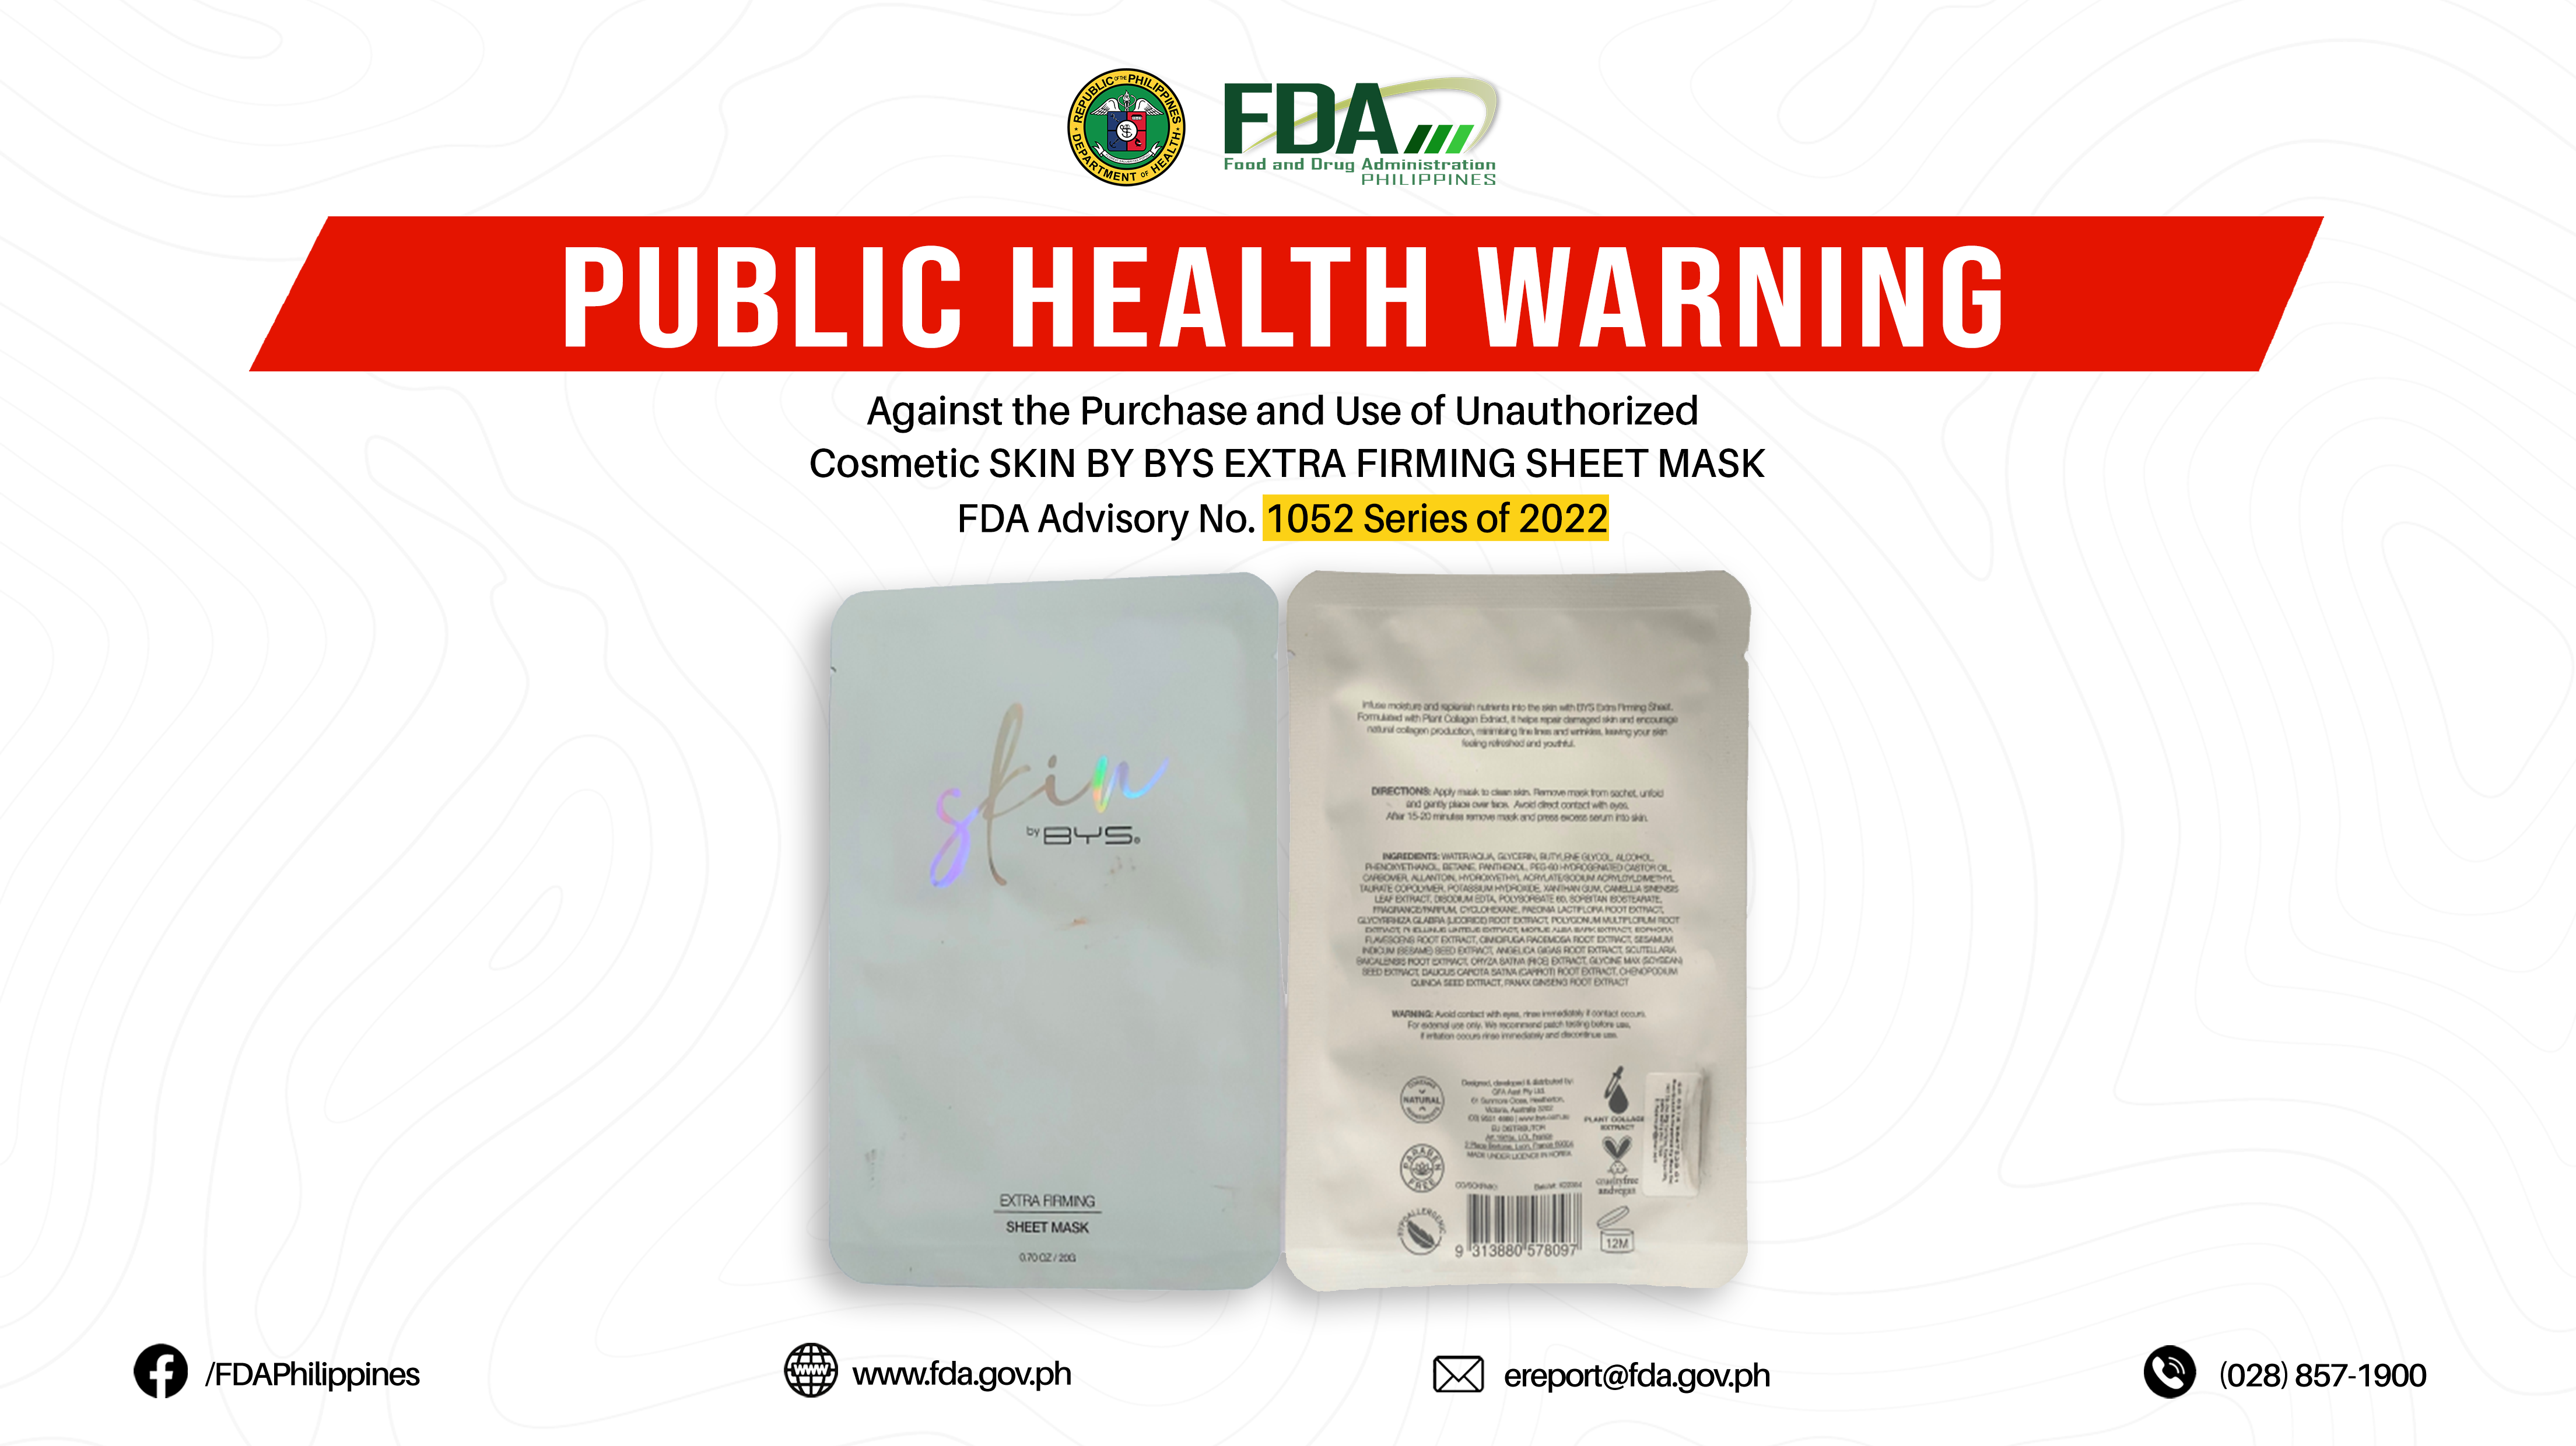 FDA Advisory No.2022-1052 || Public Health Warning Against the Purchase and Use of Unauthorized Cosmetic SKIN BY BYS EXTRA FIRMING SHEET MASK